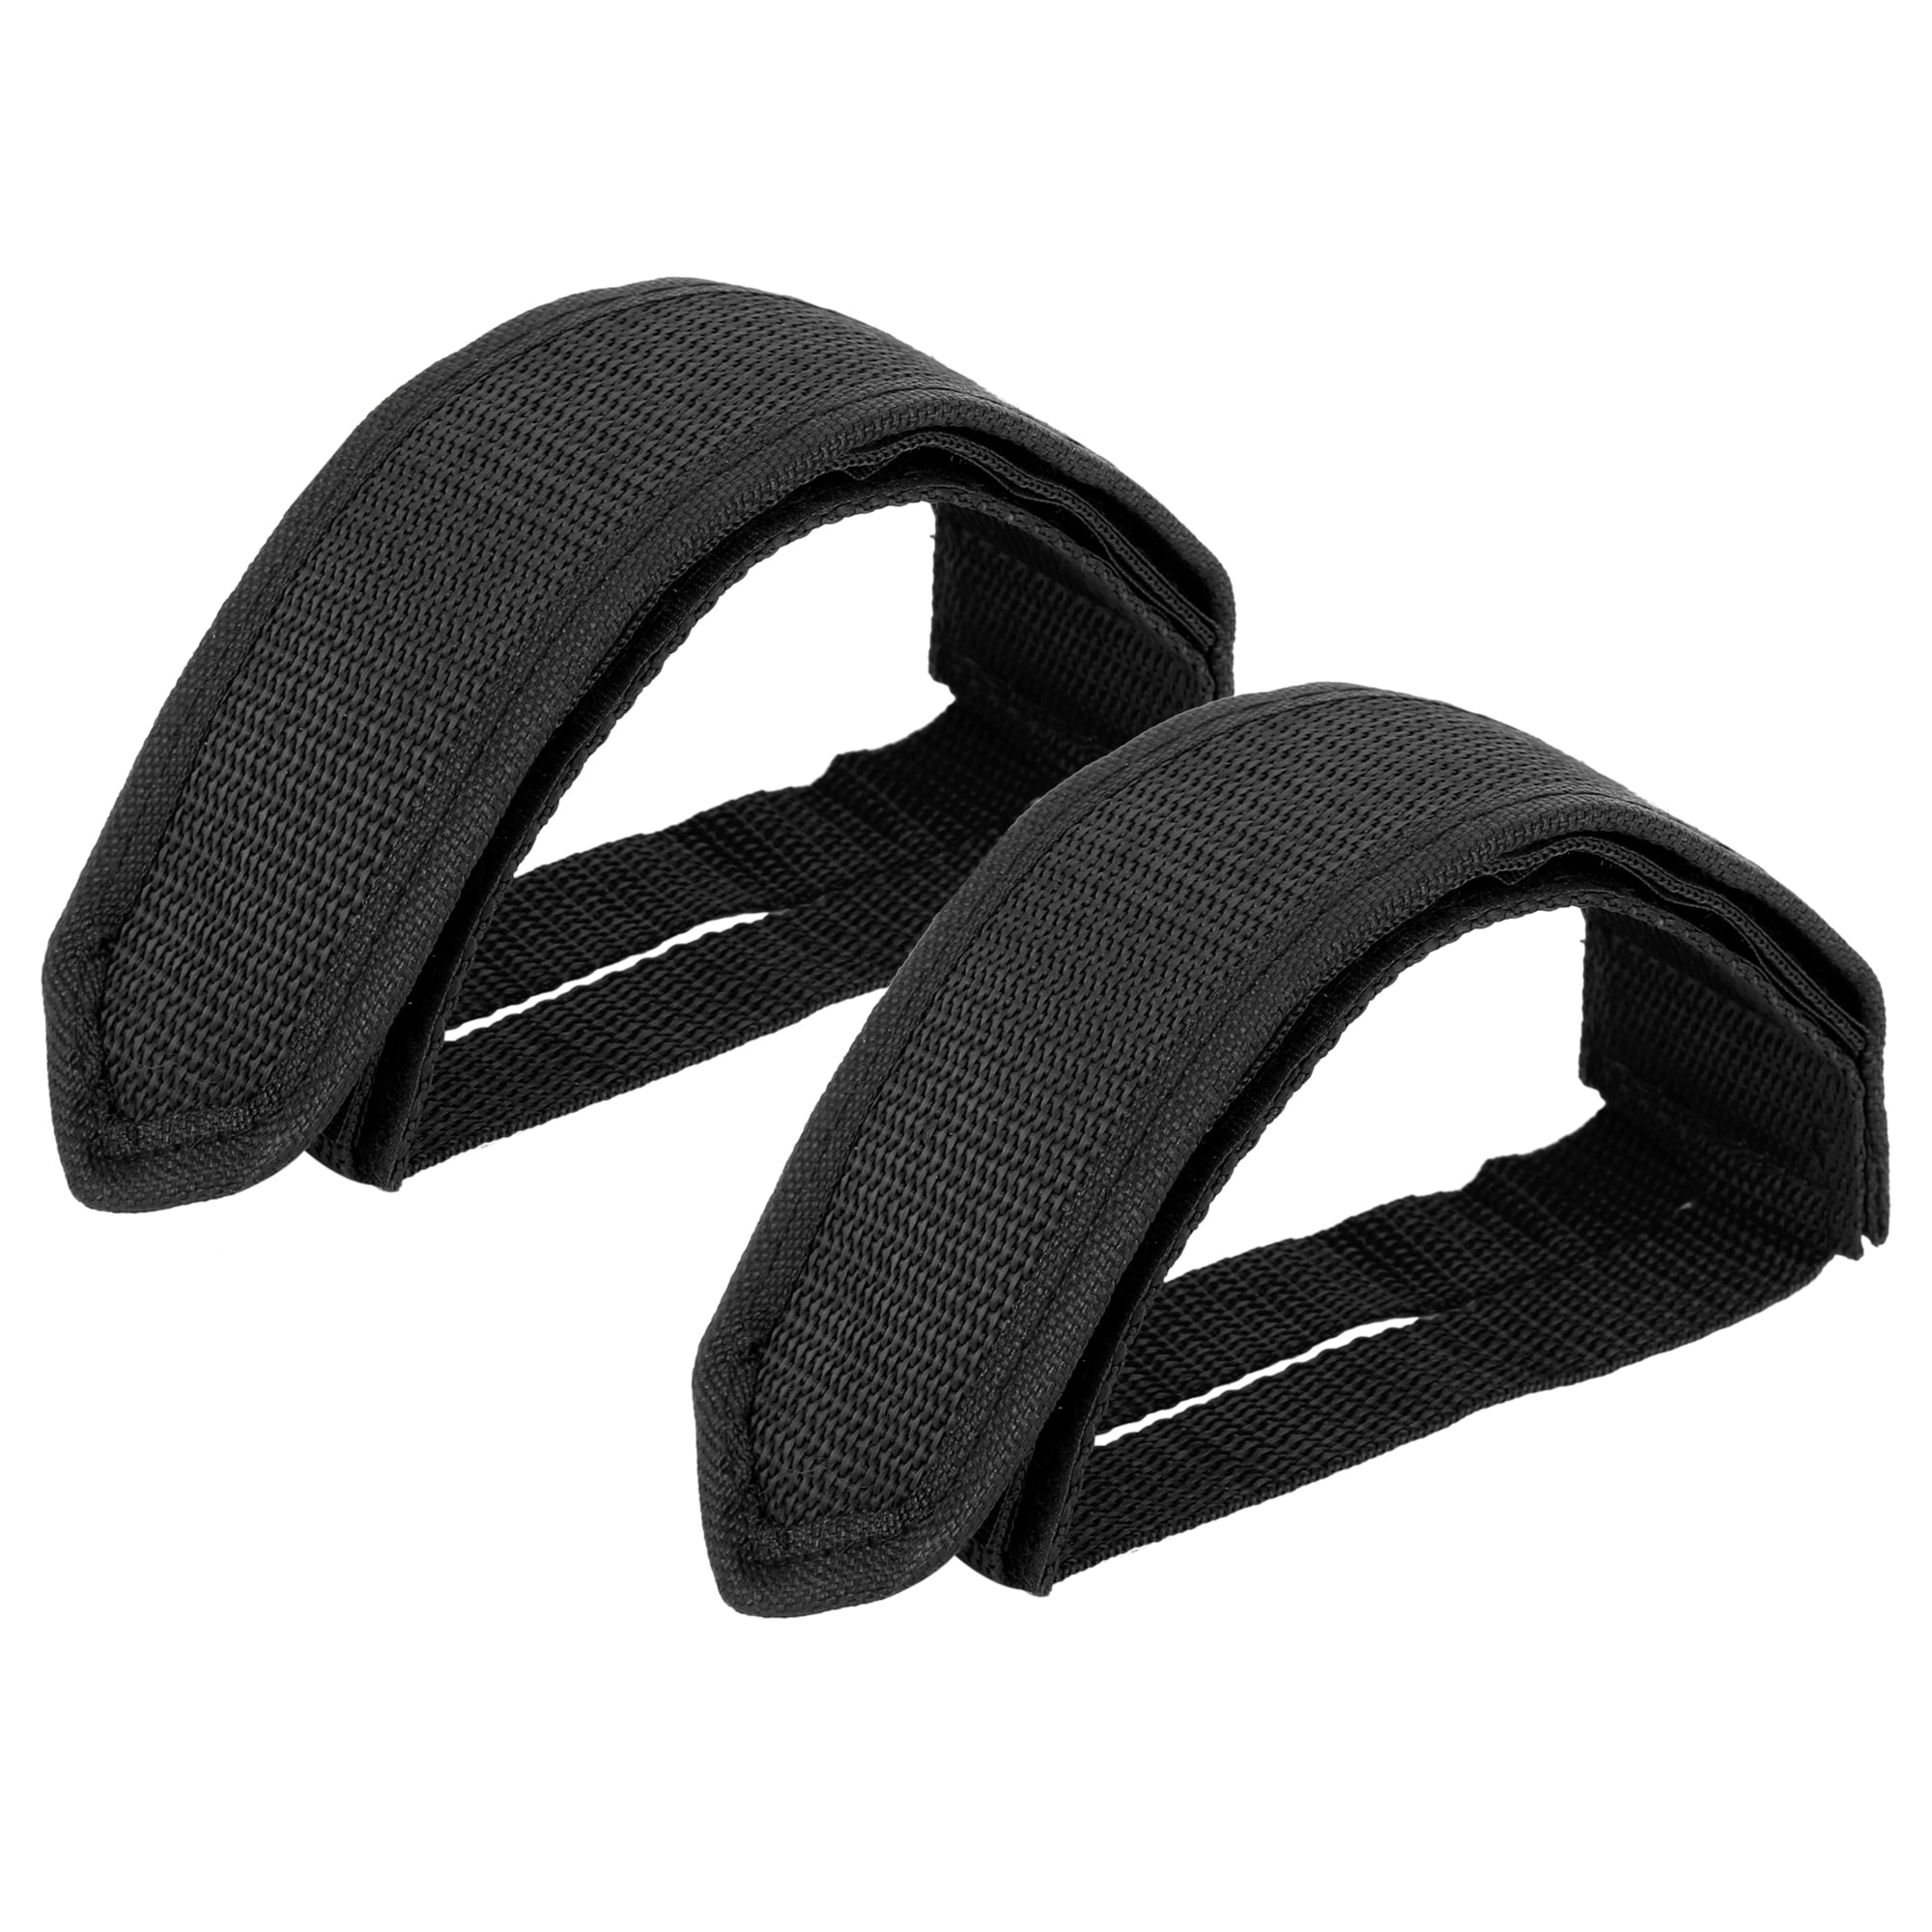 Details about   1Pair Exercise Bike Belts Bicycle Pedal Straps Fitness Equipment Accessor TM 